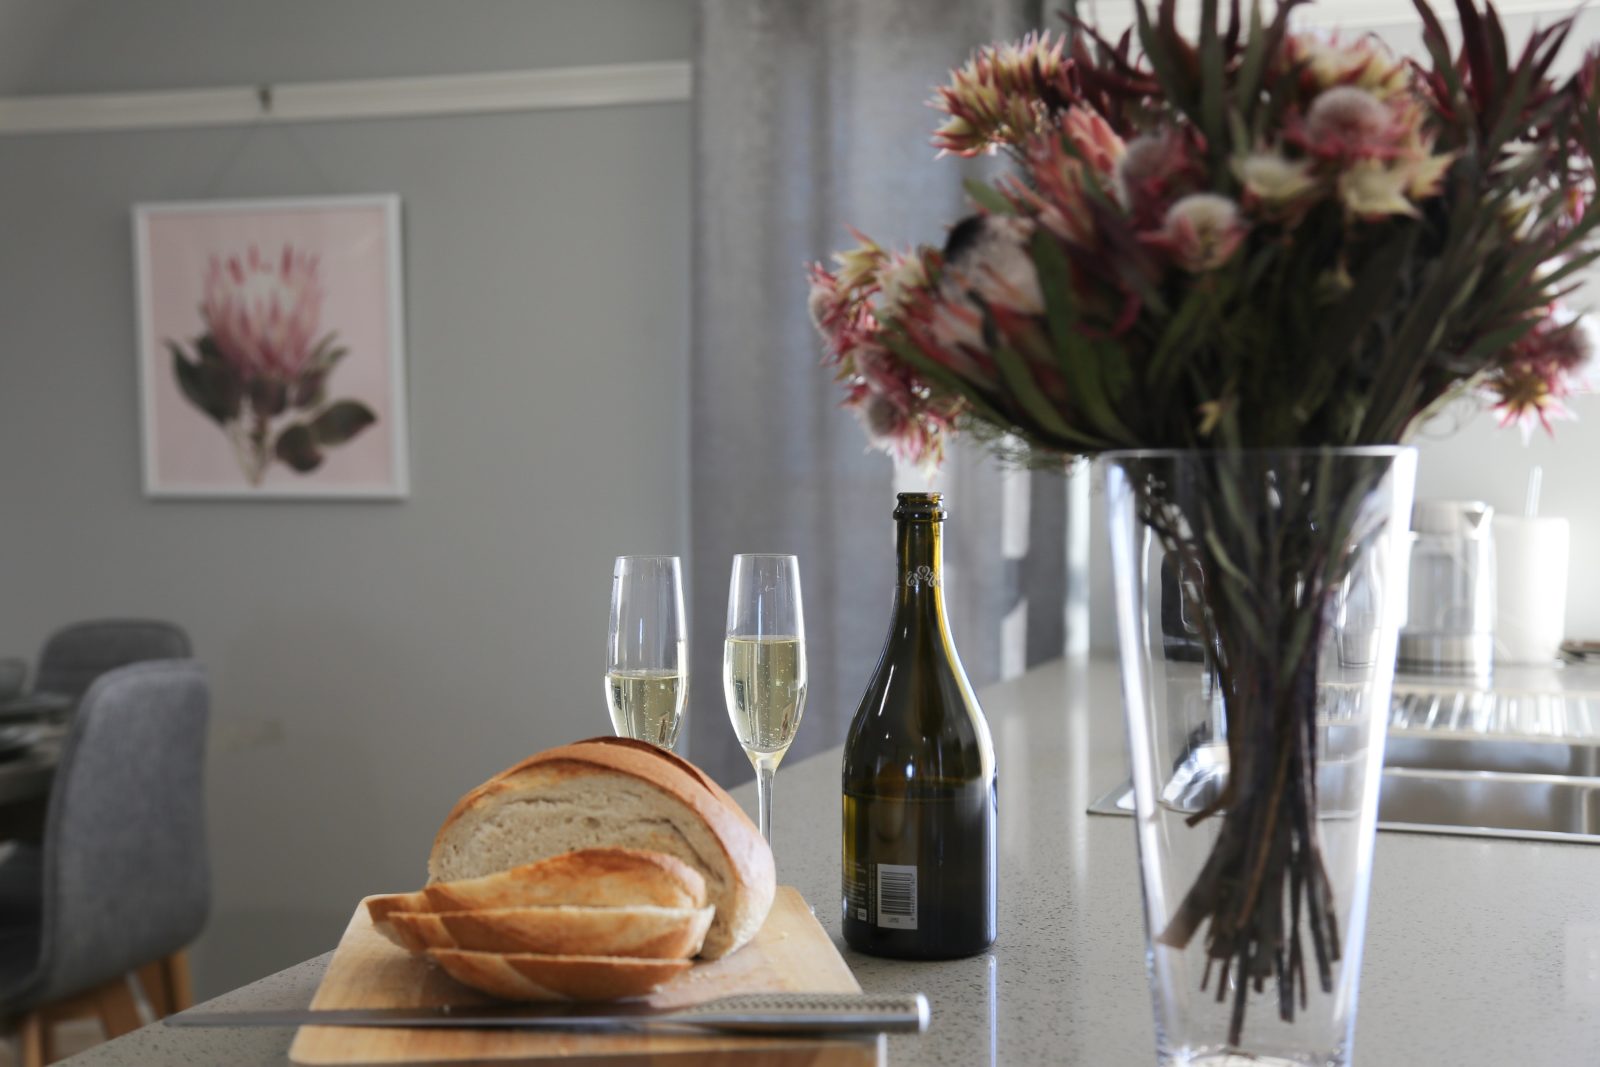 Bread and champagne in the kitchen